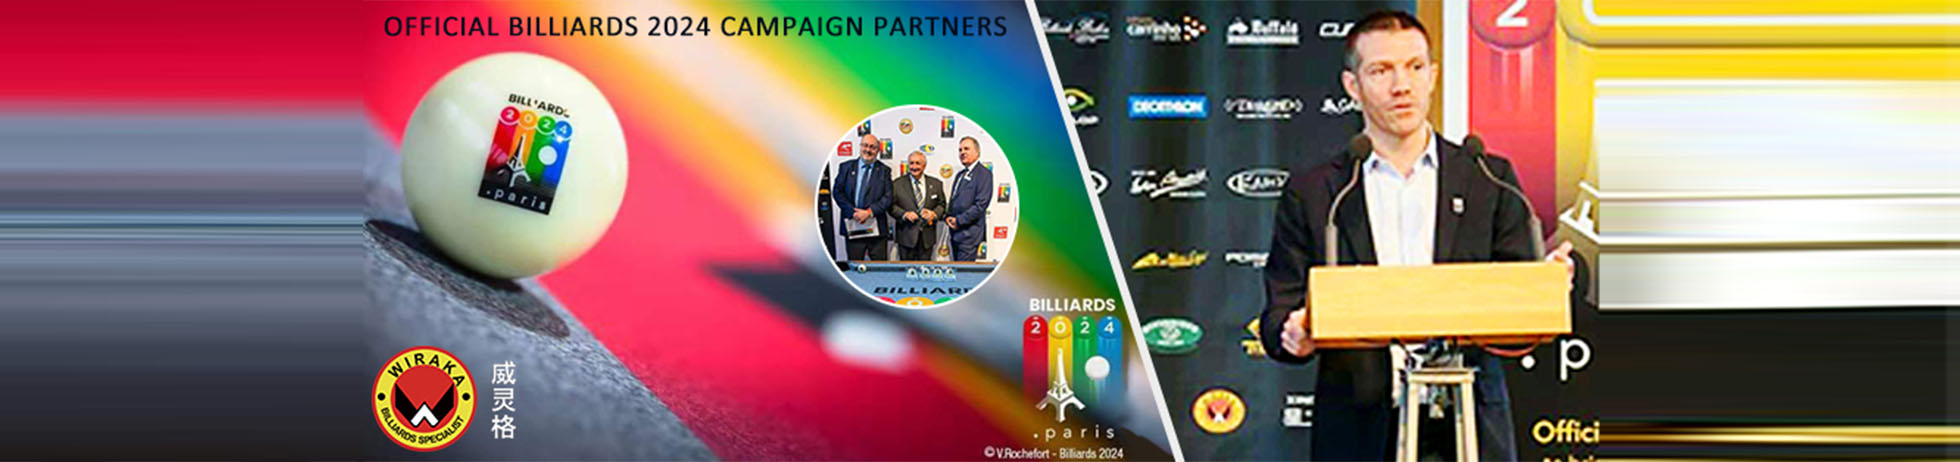 official-billiards-2024-campaign-partners